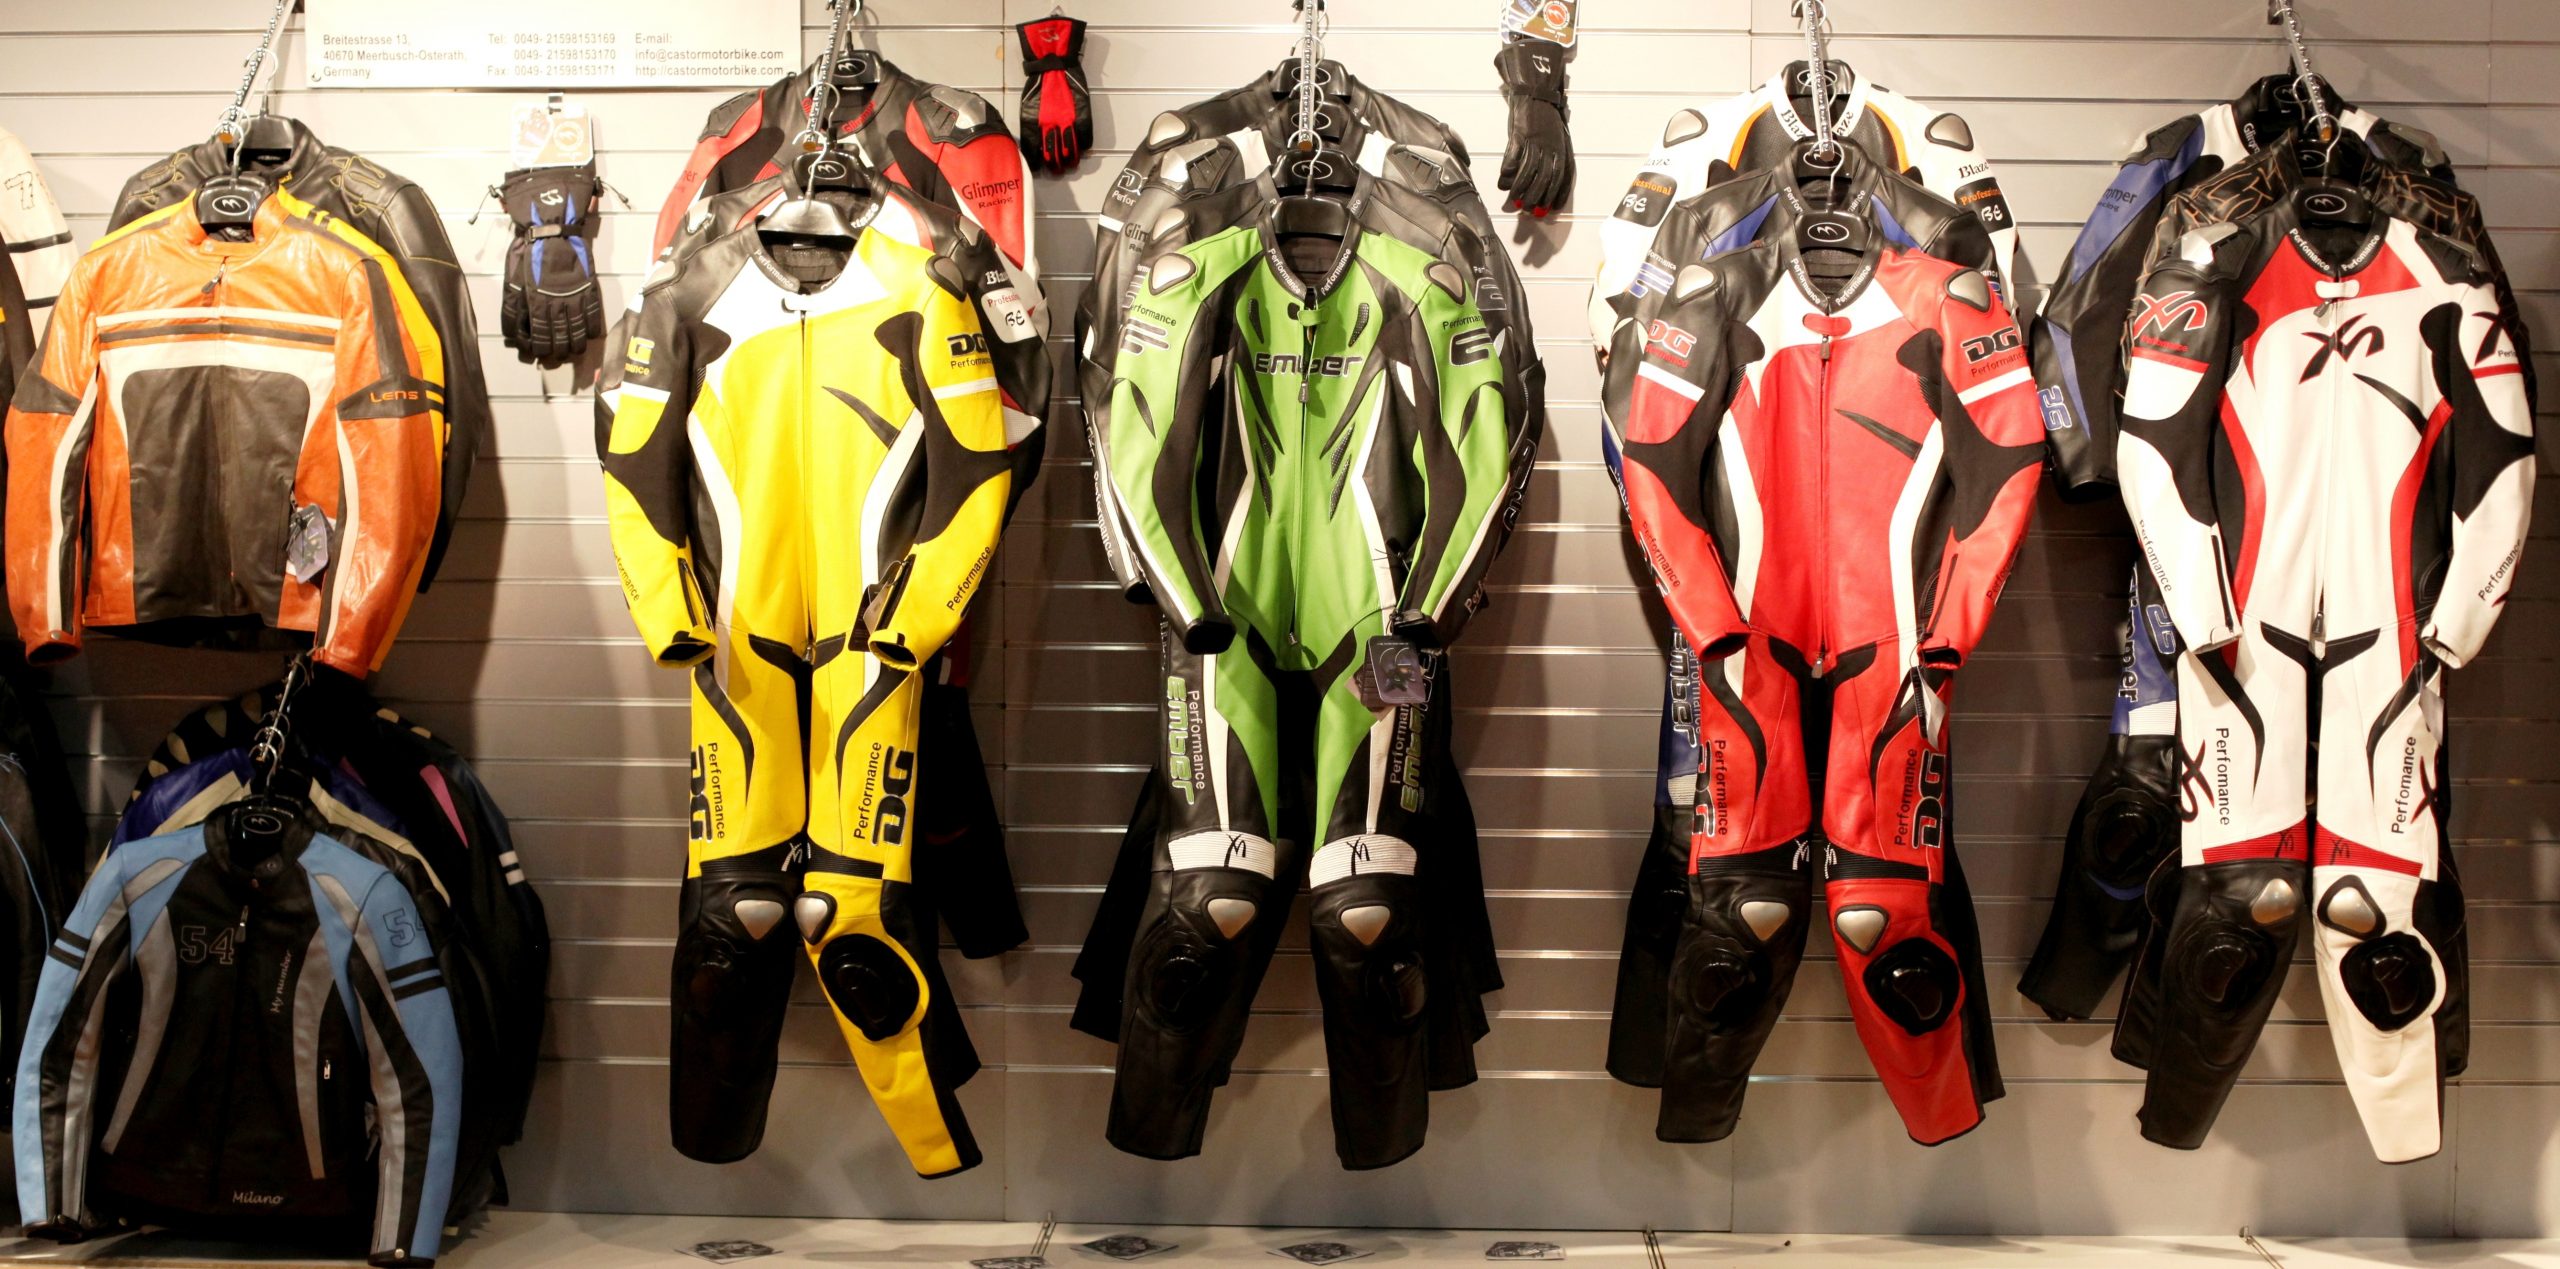 Motorcycle leathers hanging in shop